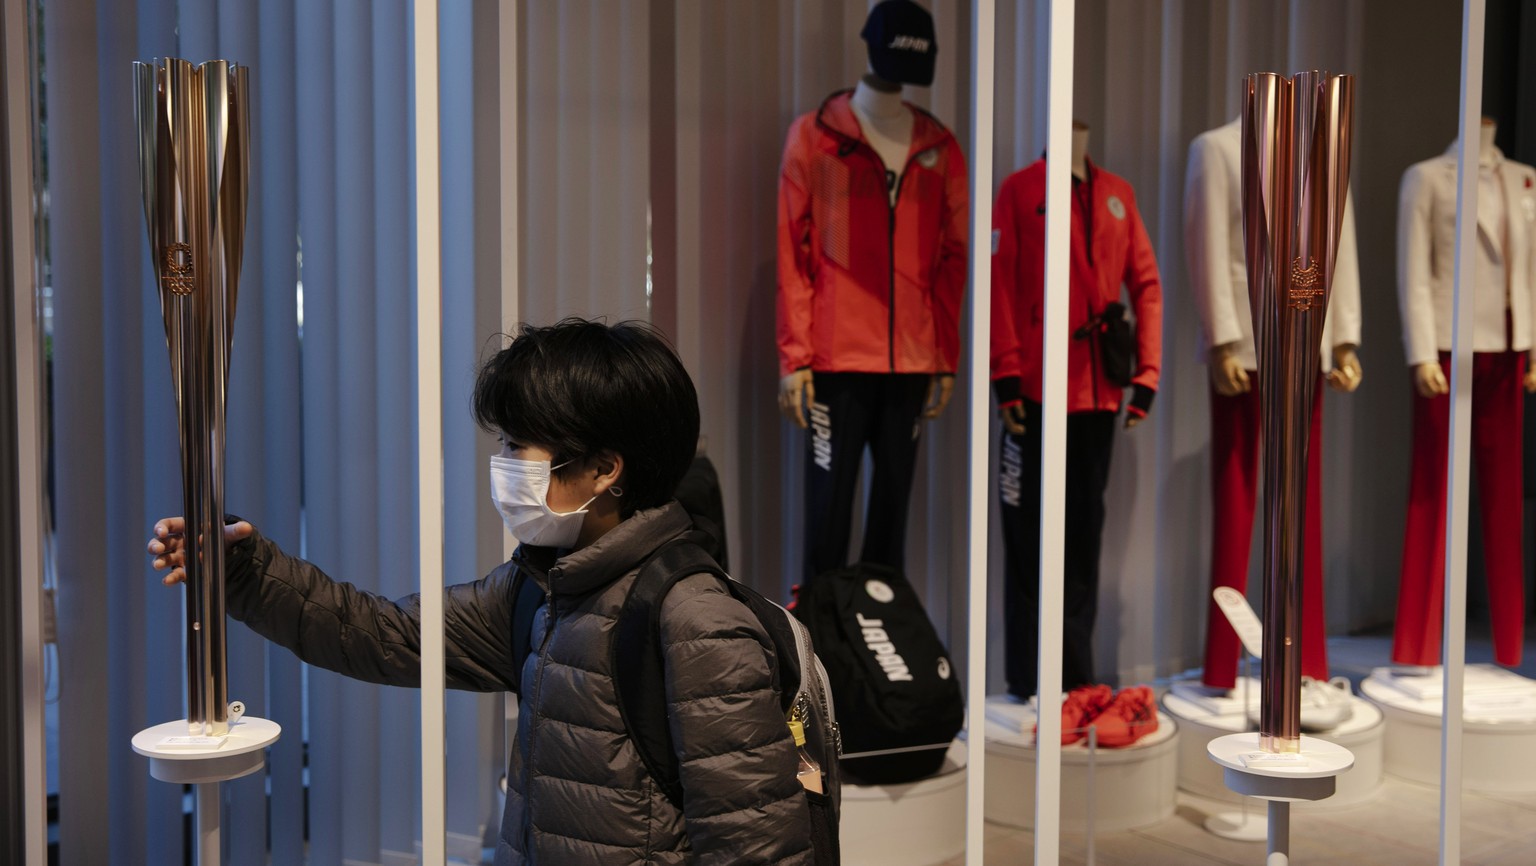 A boy with a mask poses with an Olympic torch of the Tokyo 2020 Olympics while visiting Tokyo Olympic Museum, Sunday, Feb. 23, 2020, in Tokyo. (AP Photo/Jae C. Hong)